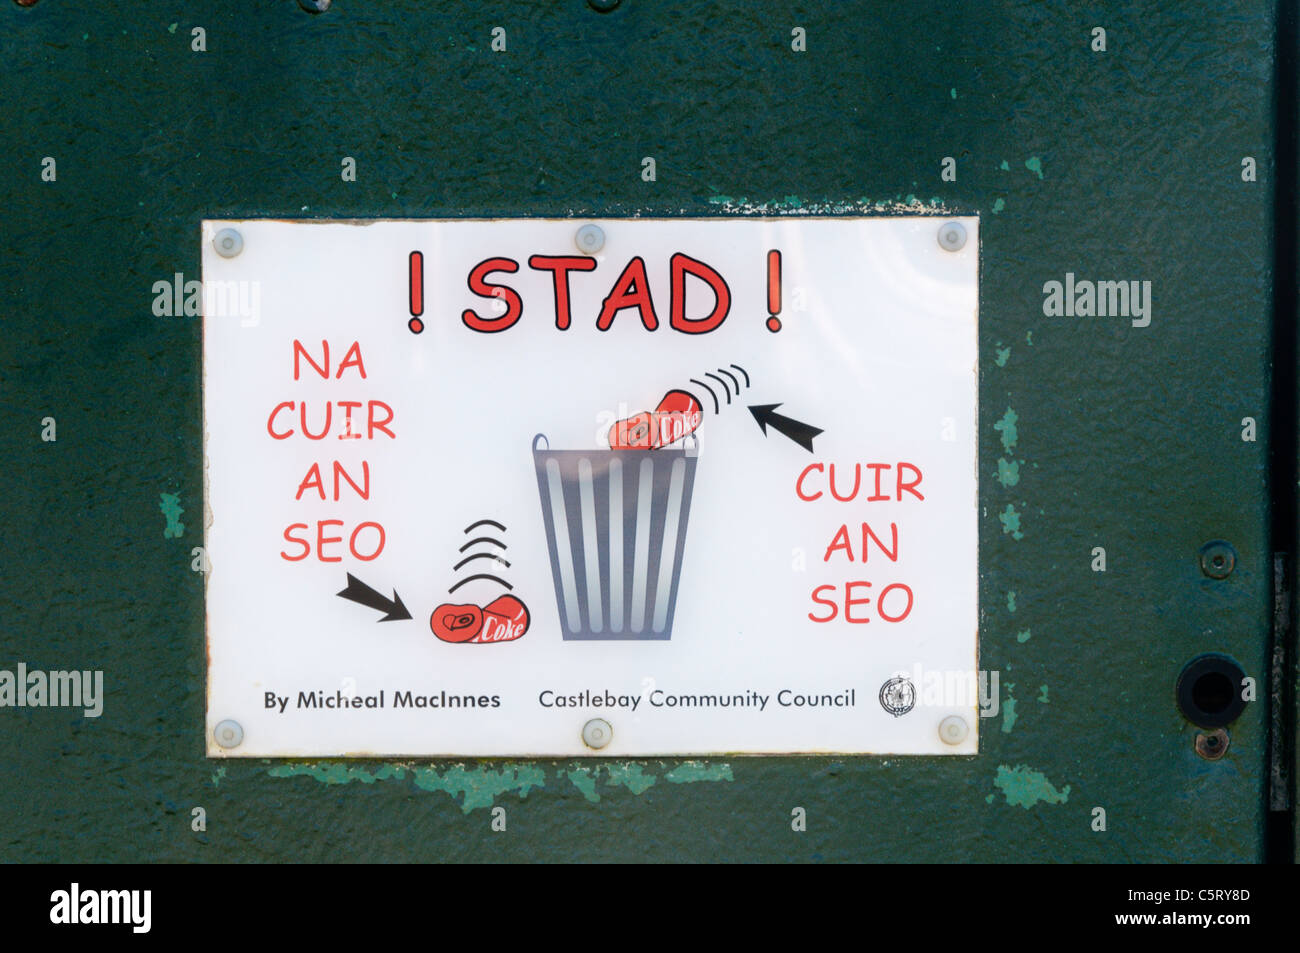 An anti-litter message in Gaelic on a sign in Scotland Stock Photo